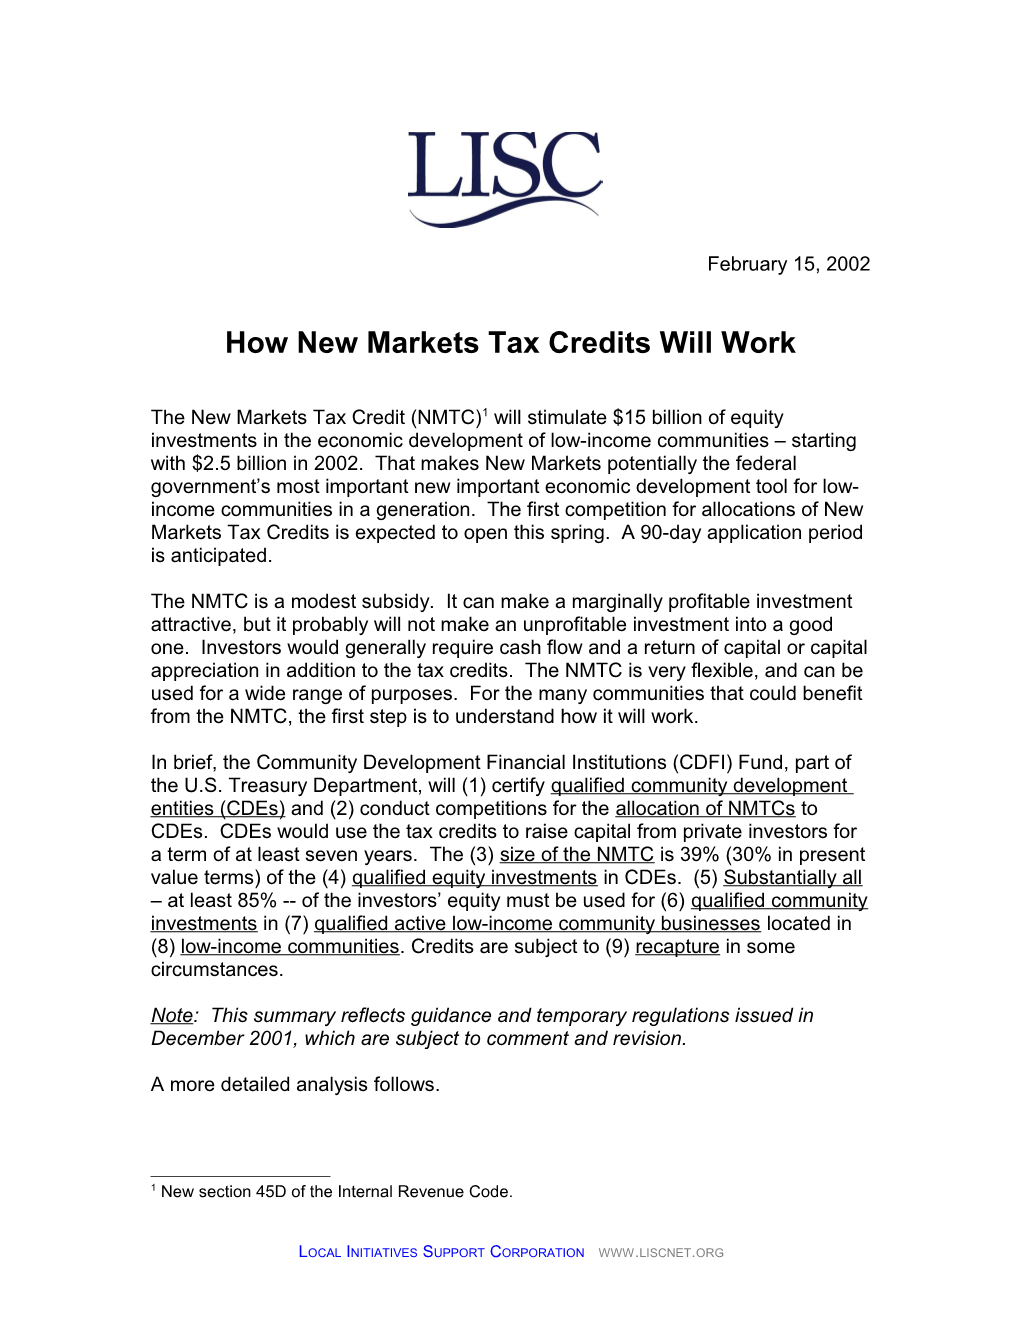 How New Markets Tax Credits Would Work